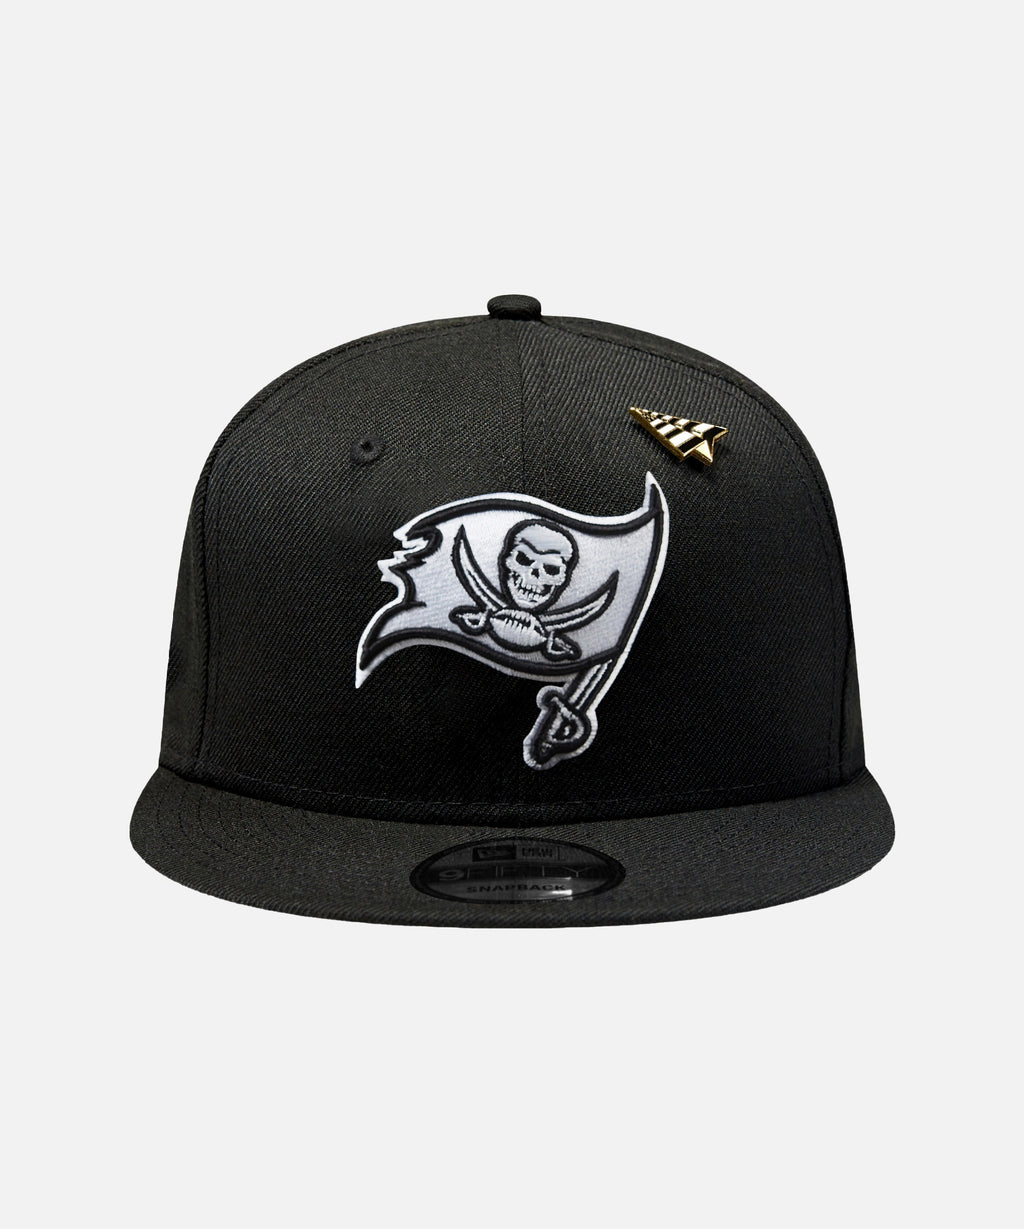 Paper Planes x Tampa Bay Buccaneers 9Fifty Snapback Hat_For Men_1